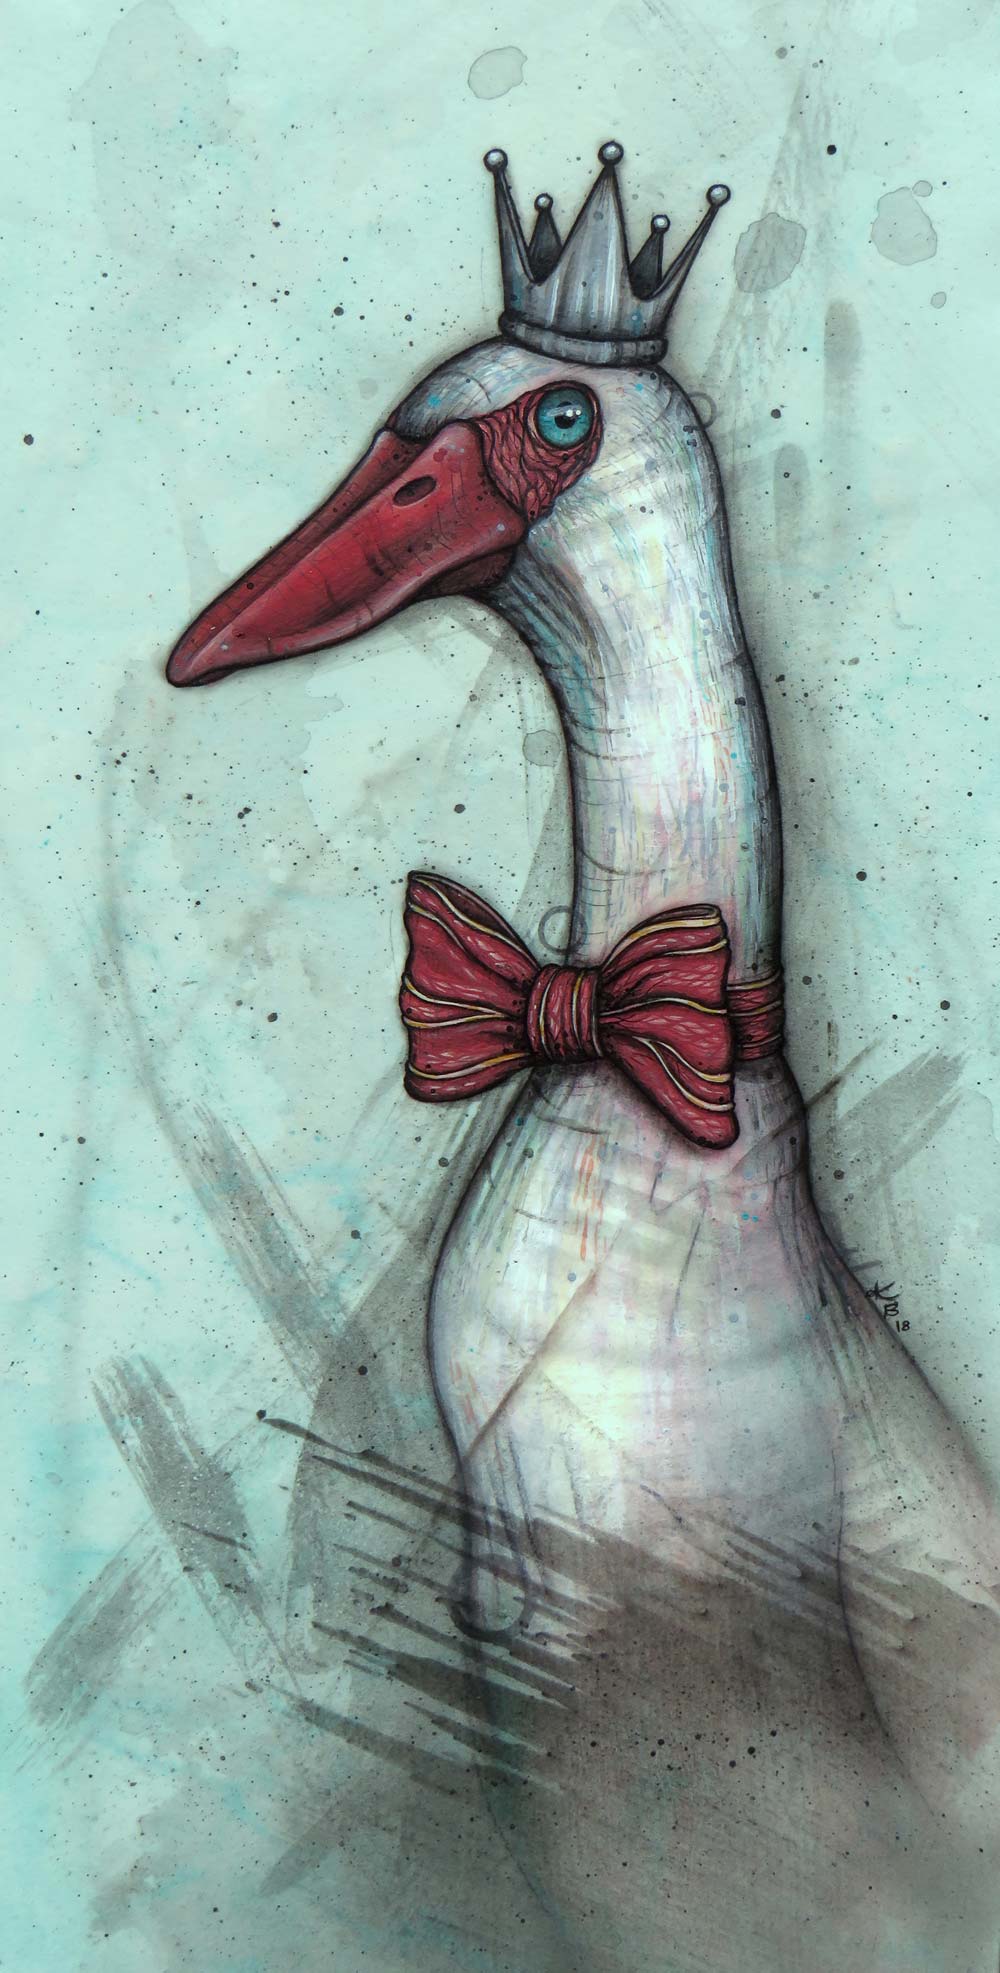 A crowned goose with a bow tie made of bacon